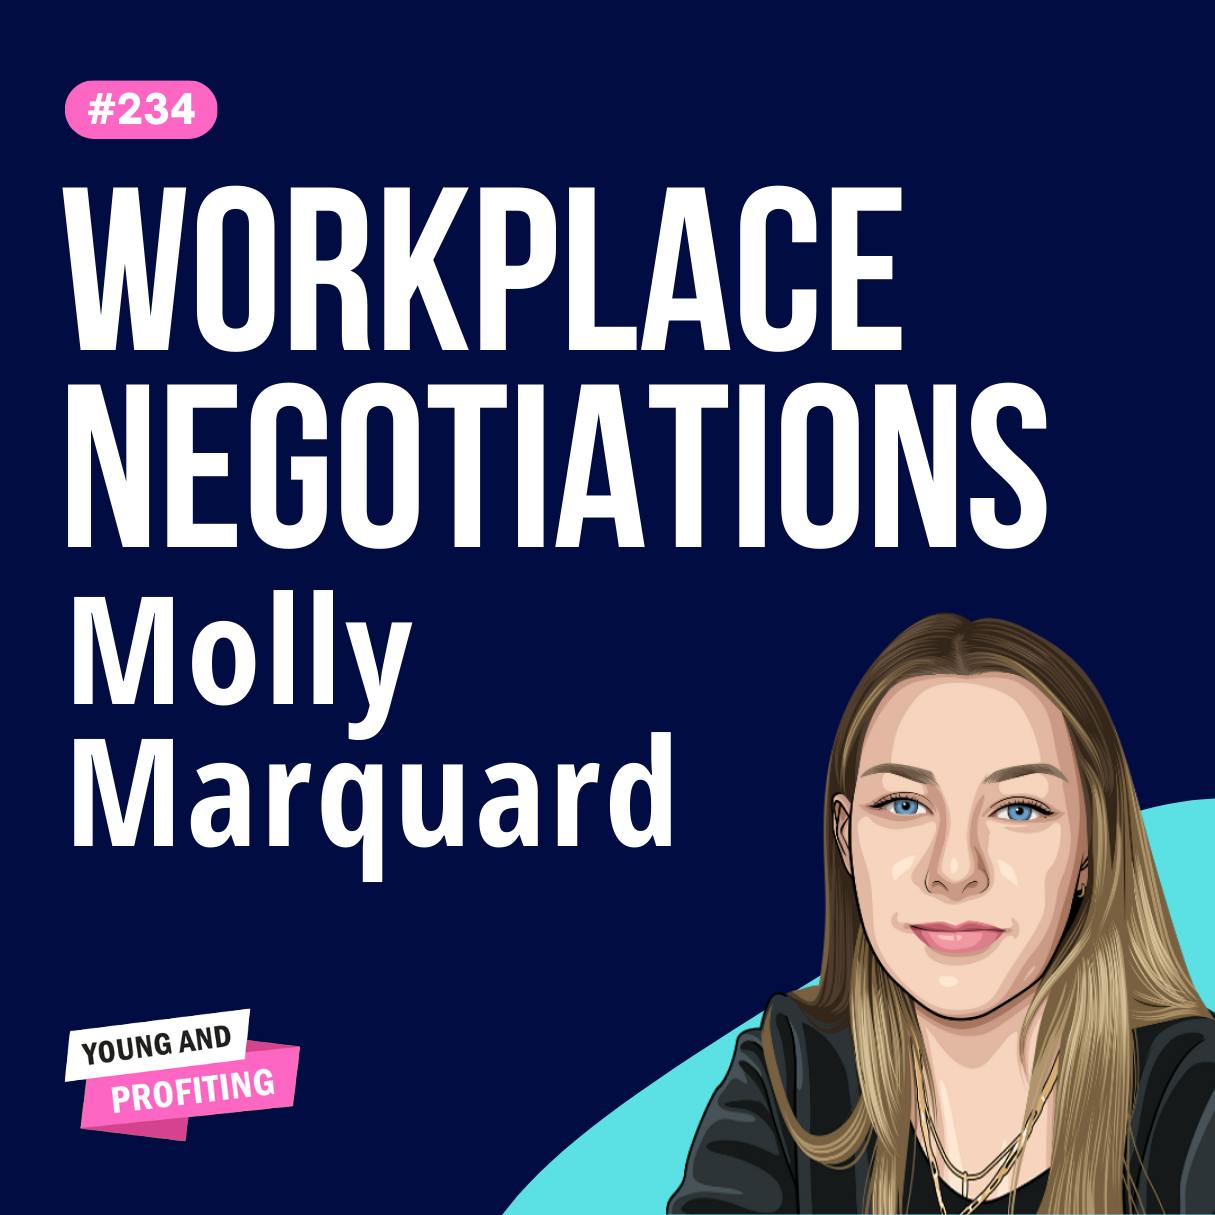 Molly Marquard: The Art of Negotiation, Boost Your Career With These Expert Negotiation Strategies | E234